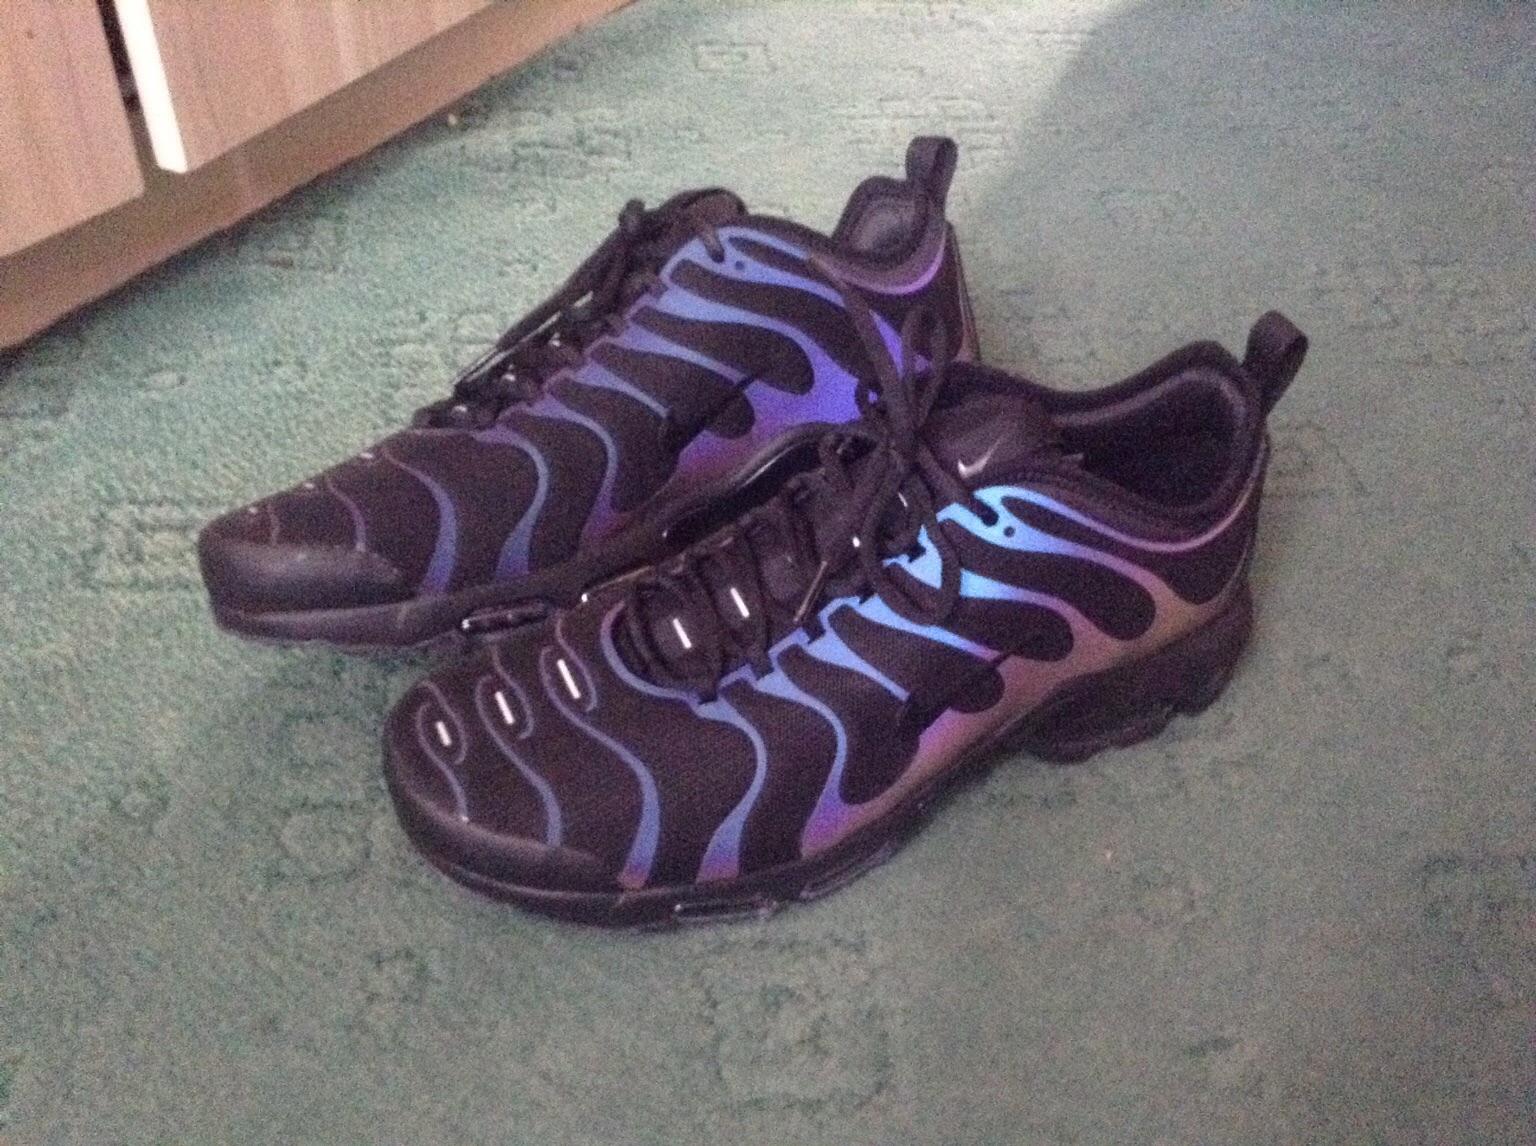 Nike Tn Ultra Limited Edition in E12 Newham for £275.00 for sale | Shpock